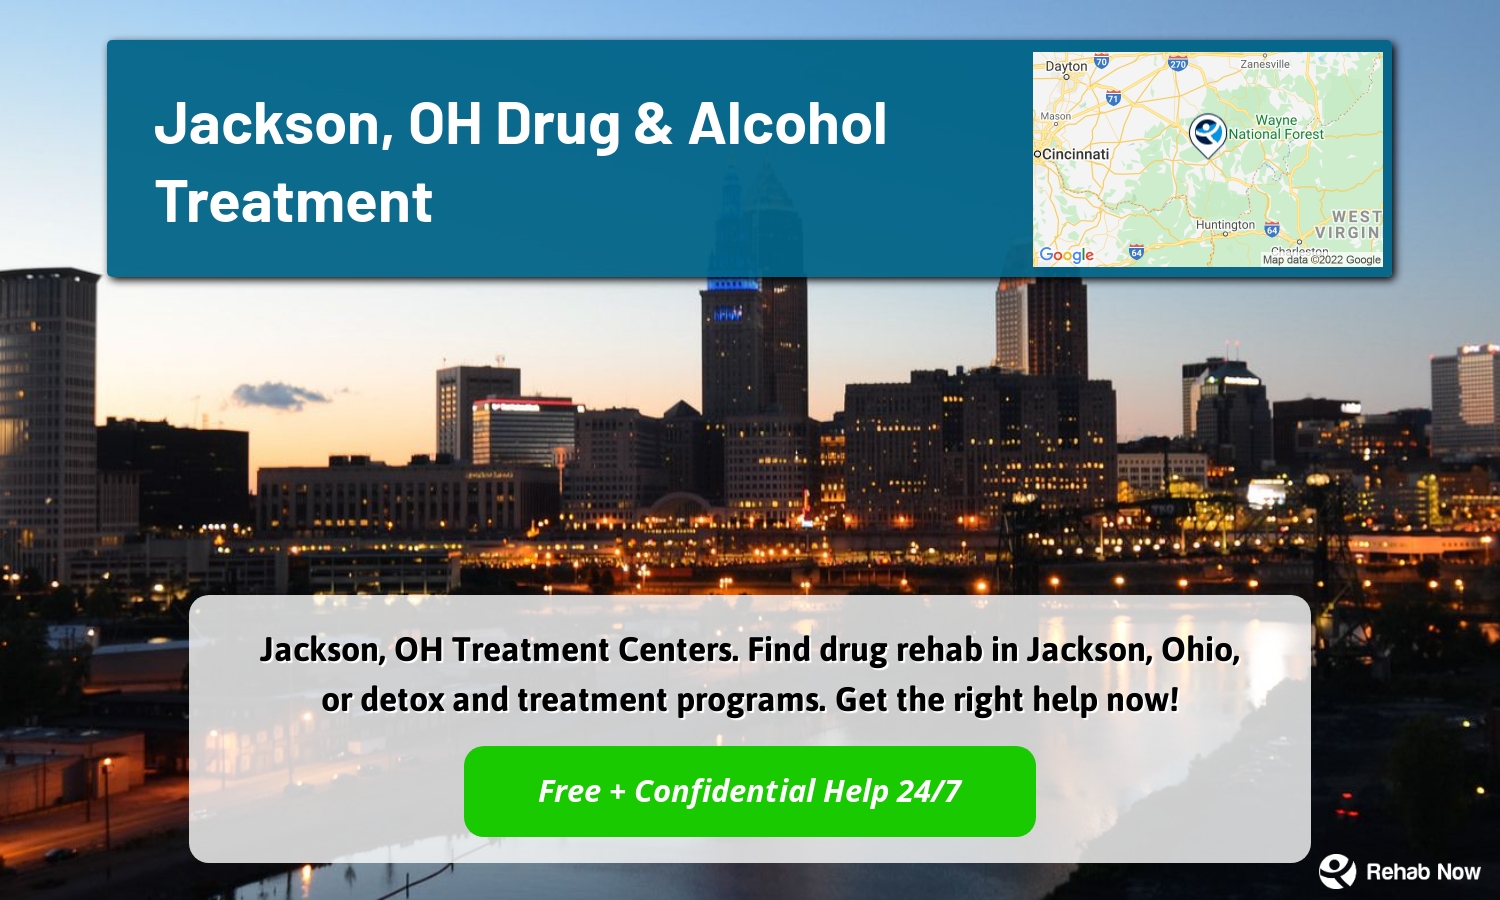 Jackson, OH Treatment Centers. Find drug rehab in Jackson, Ohio, or detox and treatment programs. Get the right help now!